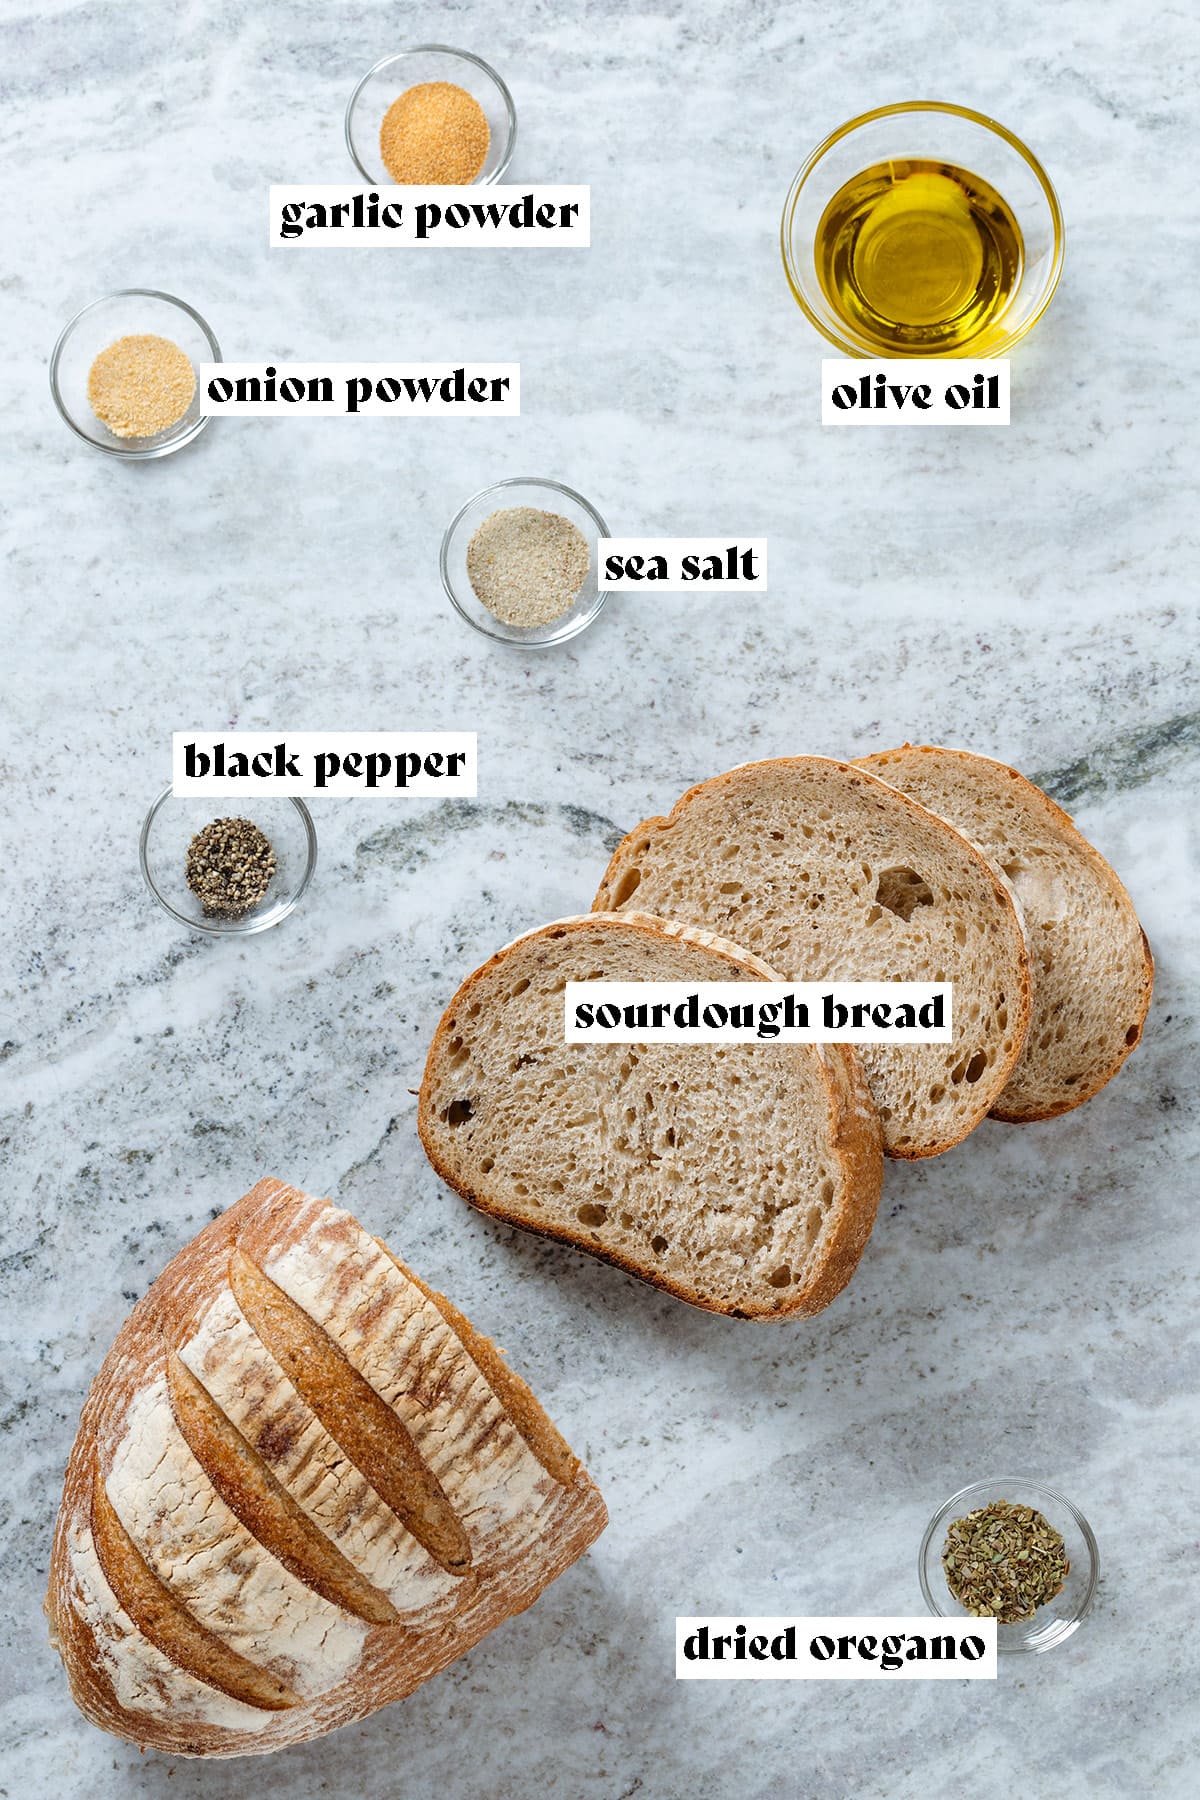 A loaf of bread, olive oil, garlic powder, onion powder, and oregano all measured and laid out with text overlay.